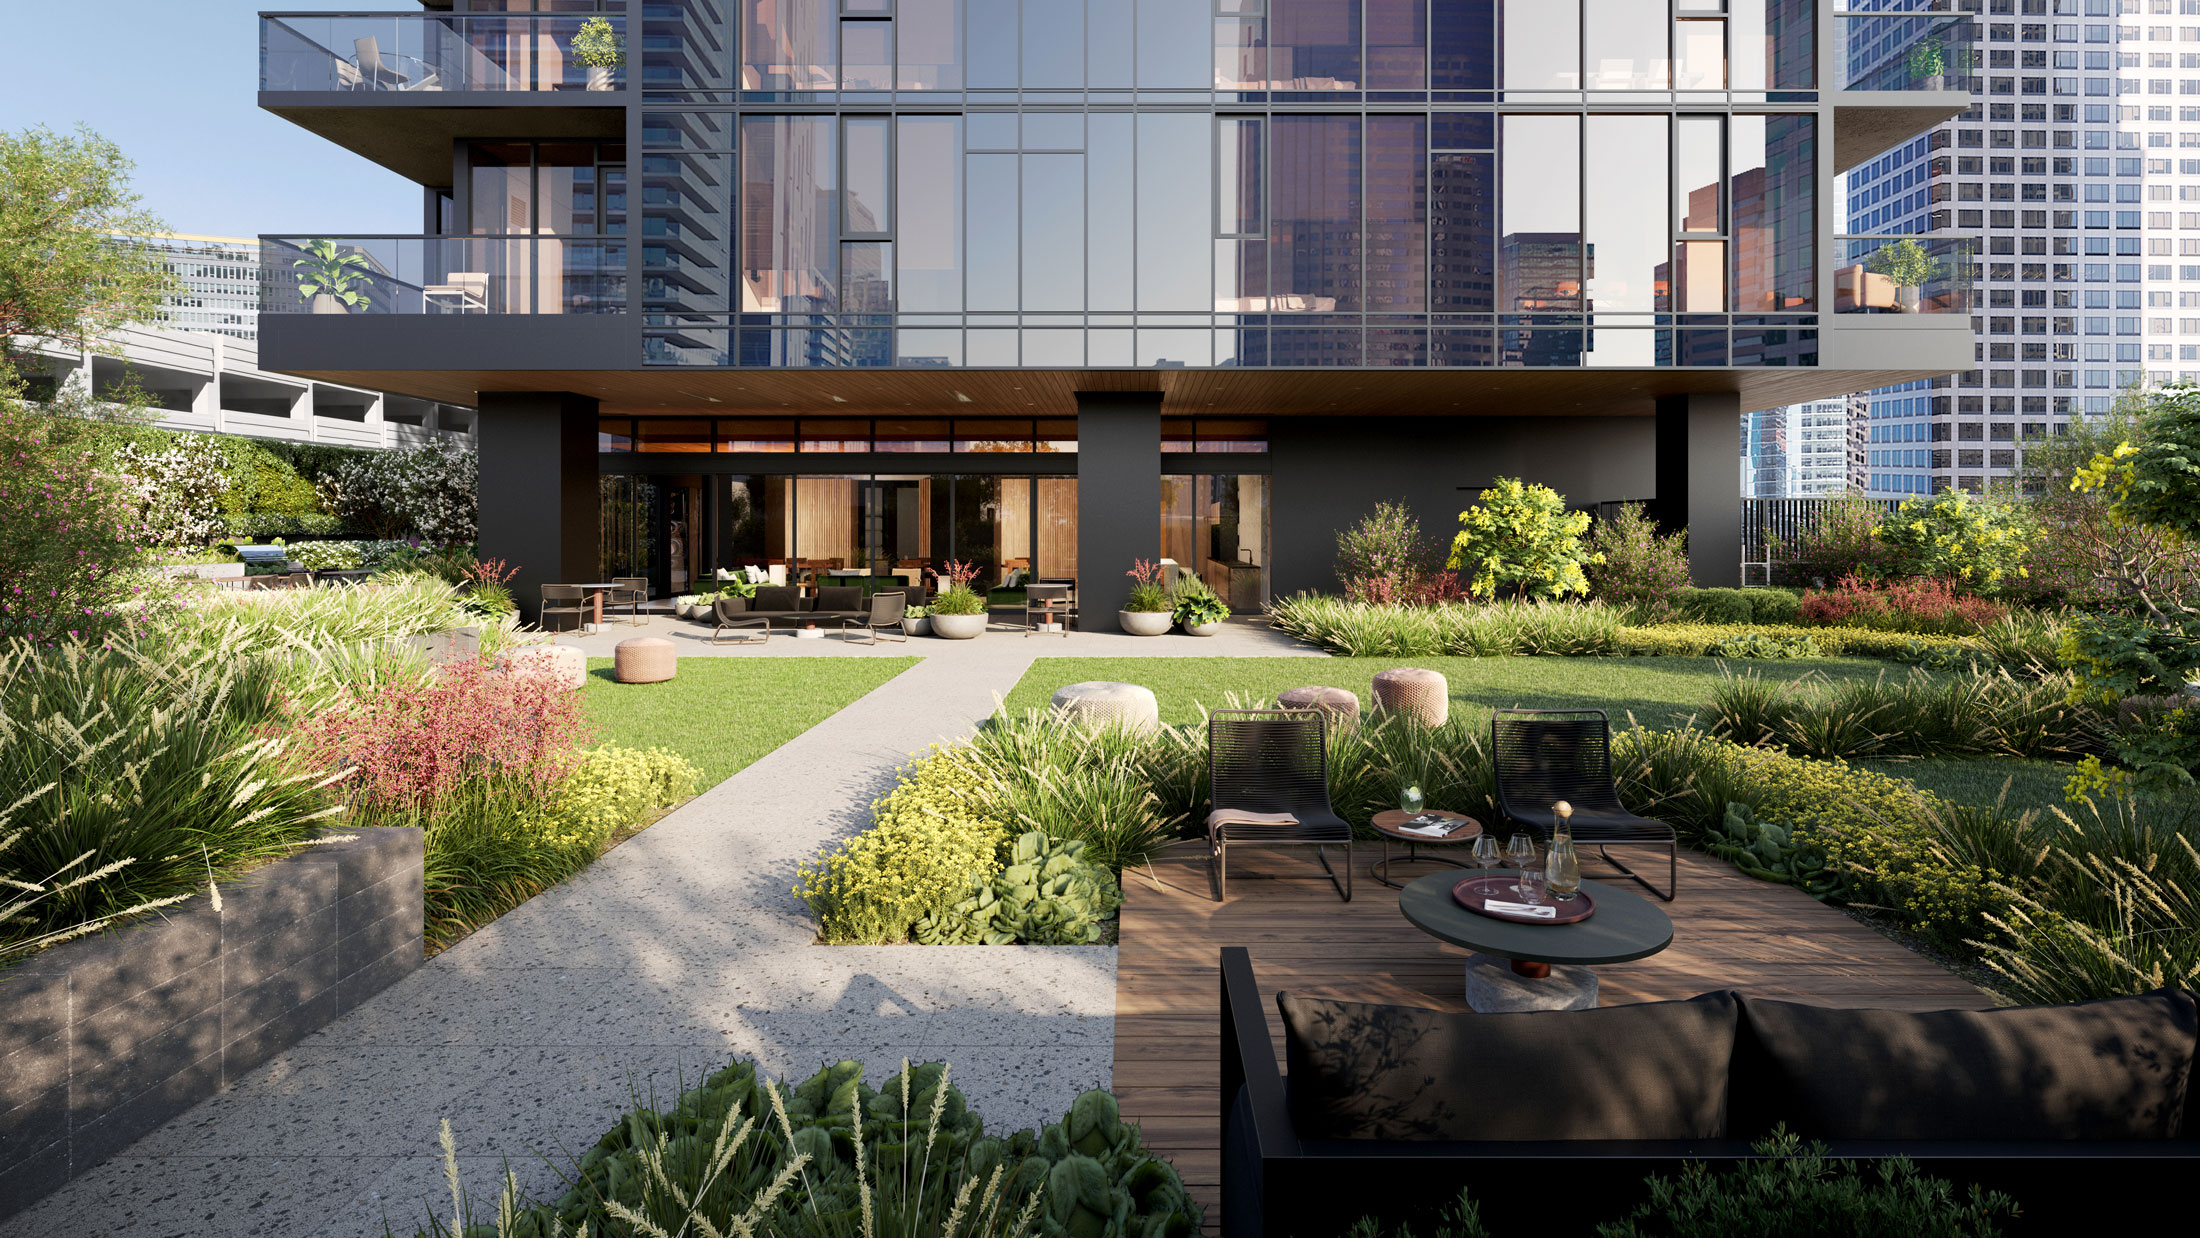 Architectural Rendering of the amenity deck of the 755 South Figueroa Street project located in Los Angeles, California